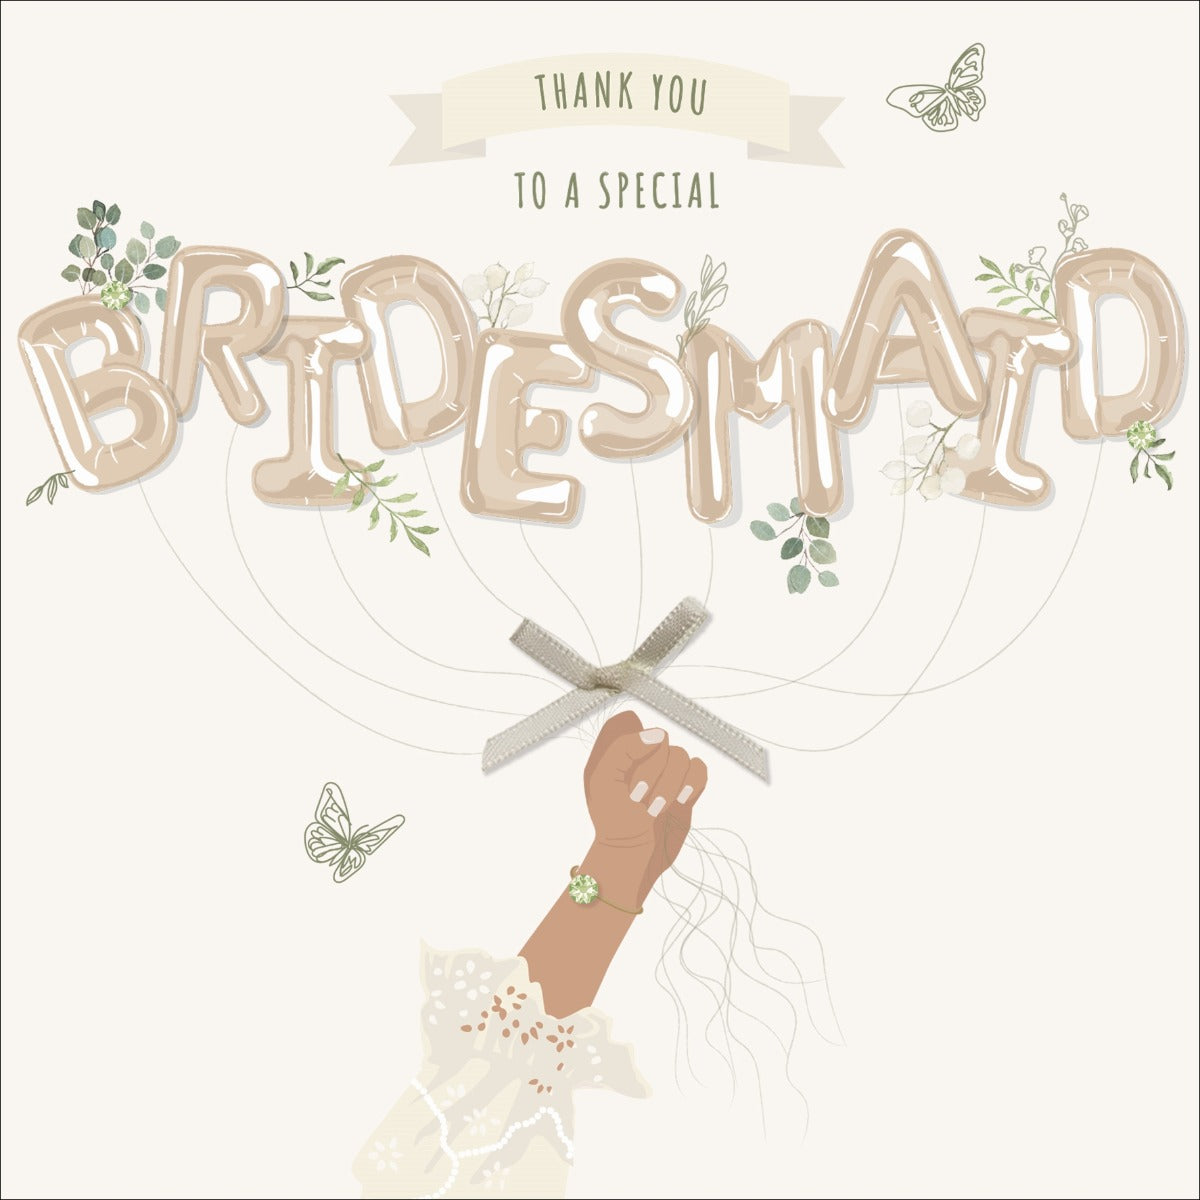 Besotted - Thank You Bridesmaid Card